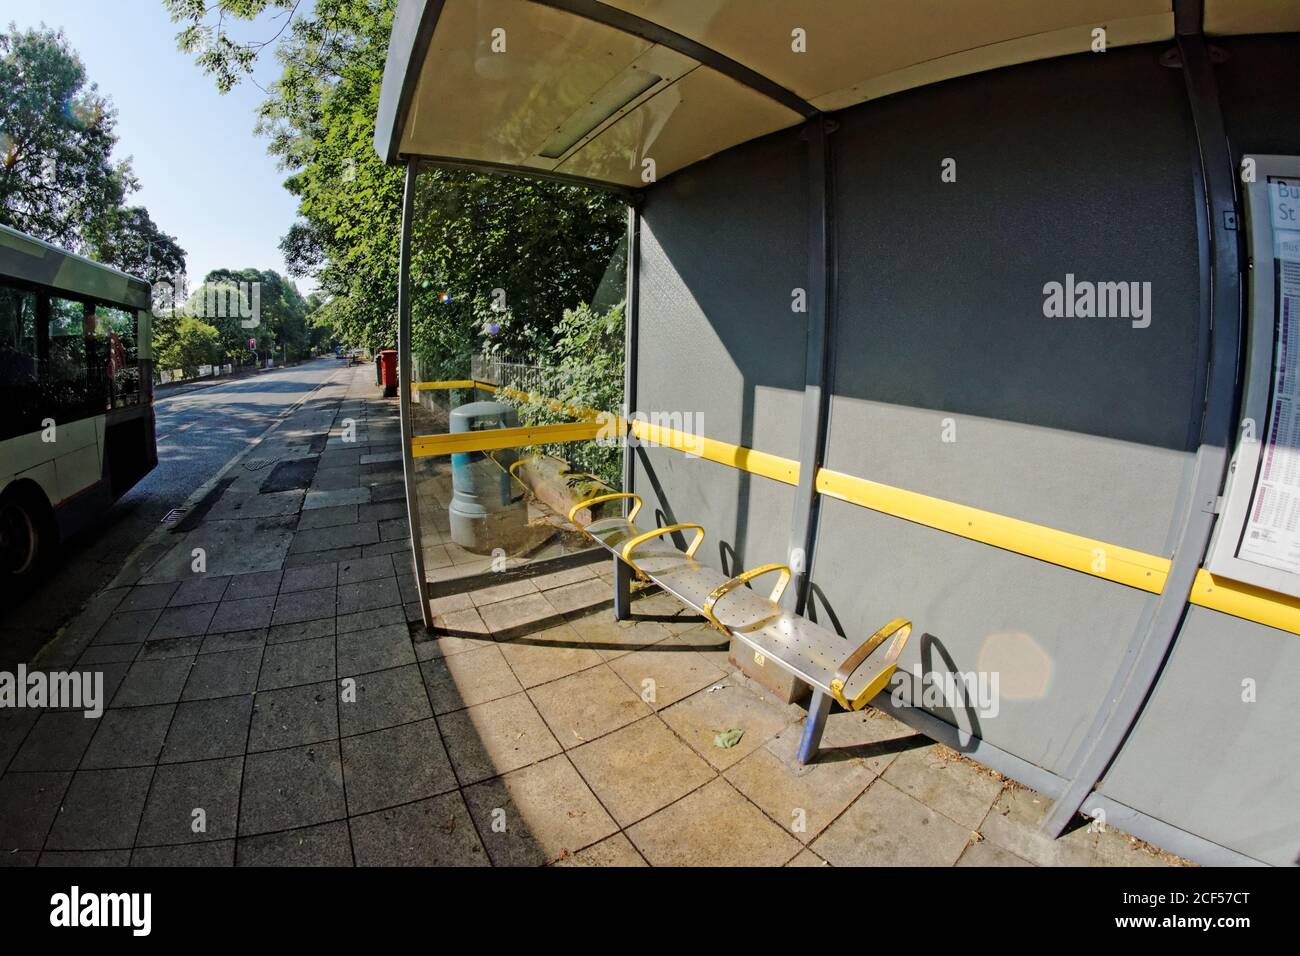 A bus stop and passing bus in Greater Manchester Stock Photo